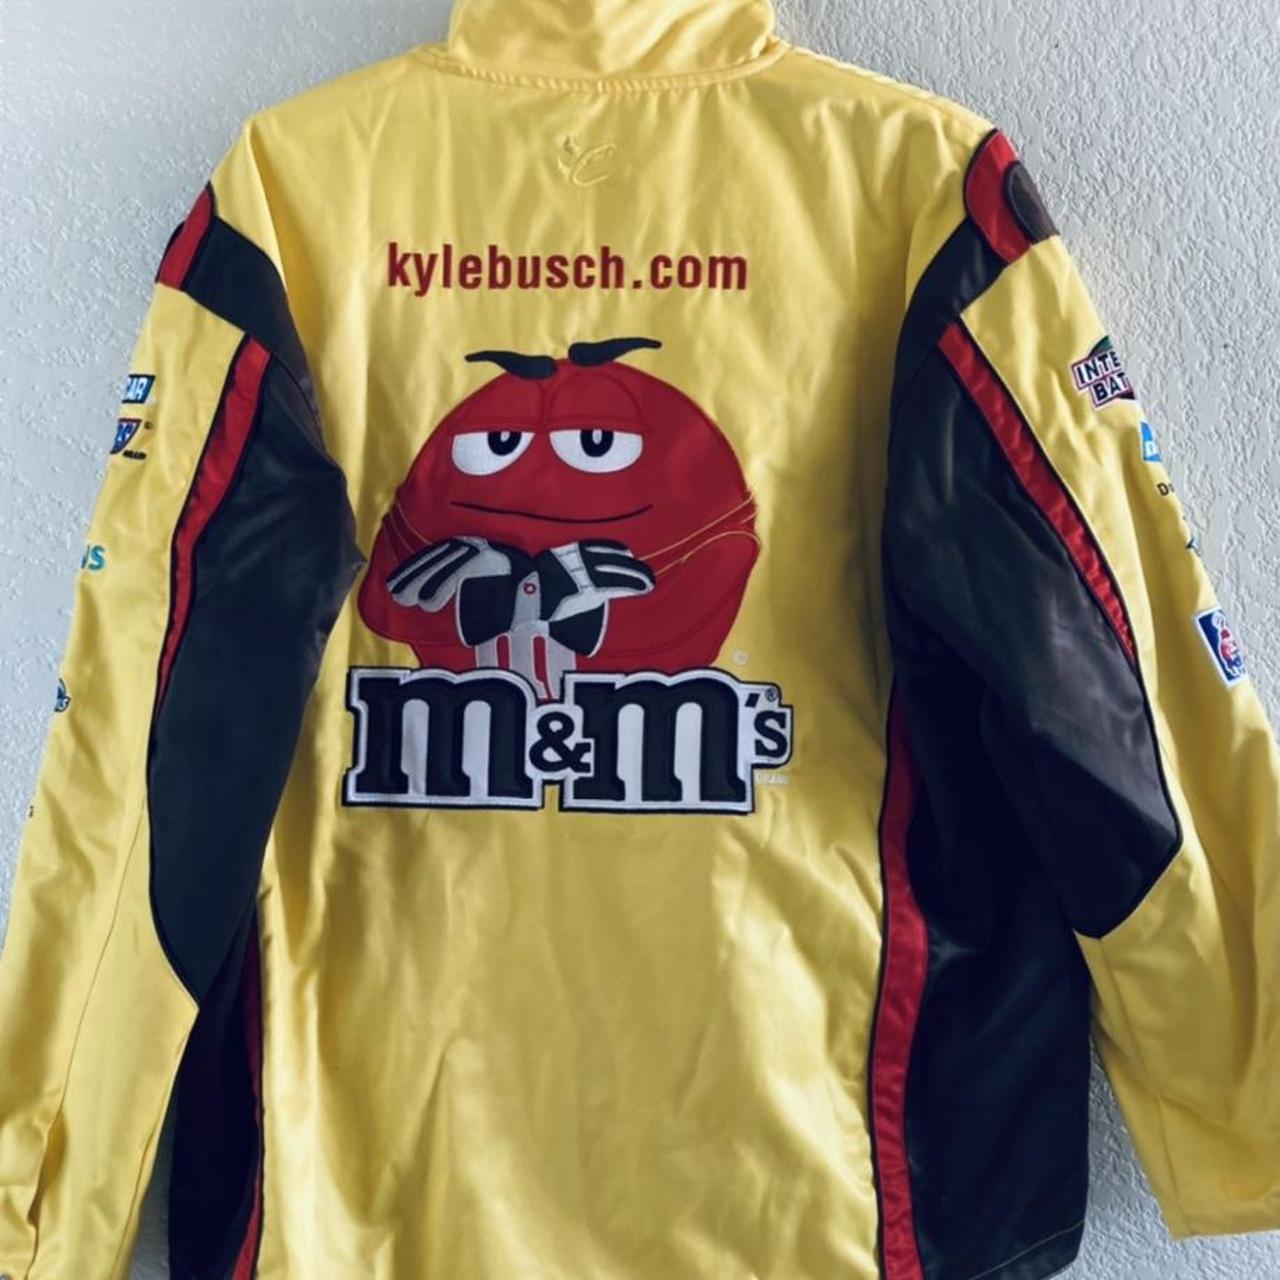 Kyle Busch M&M's Men's Yellow Nascar Jacket by Chase... - Depop